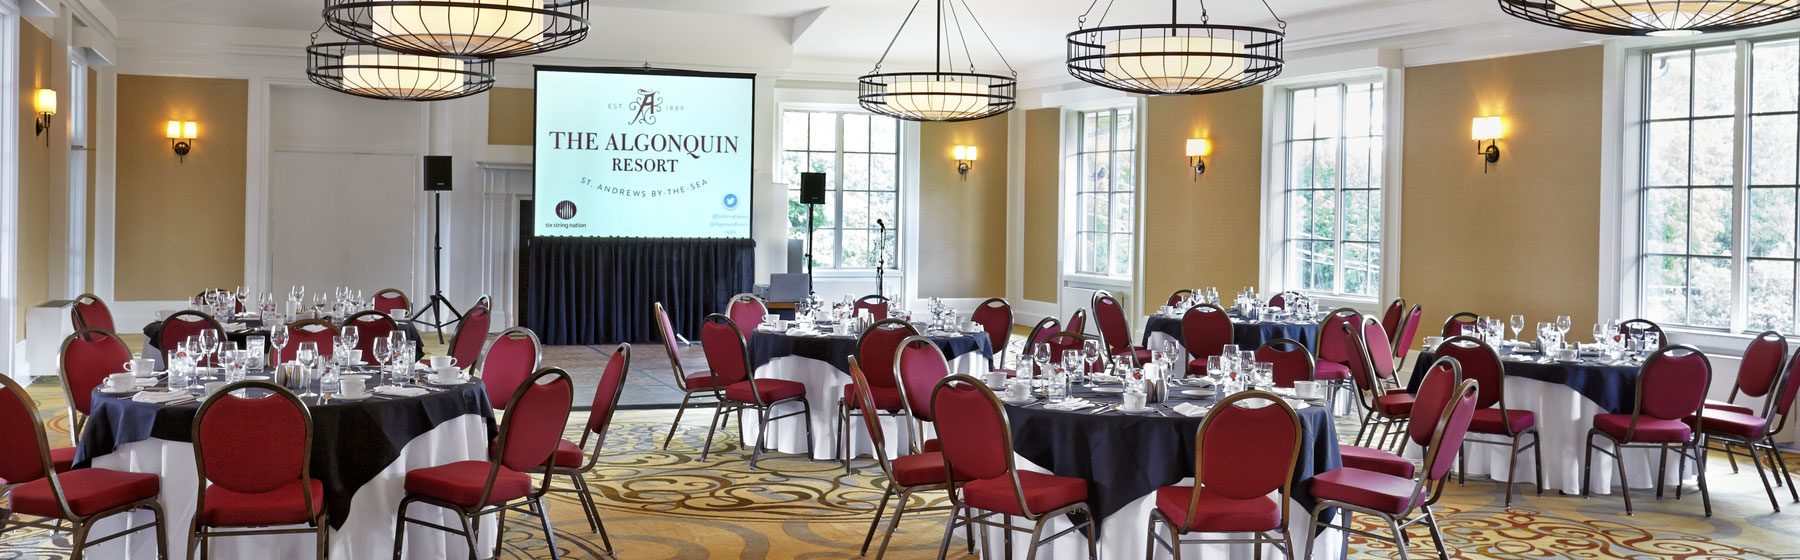 Meeting Planner at Algonquin resort, Andrews By The Sea